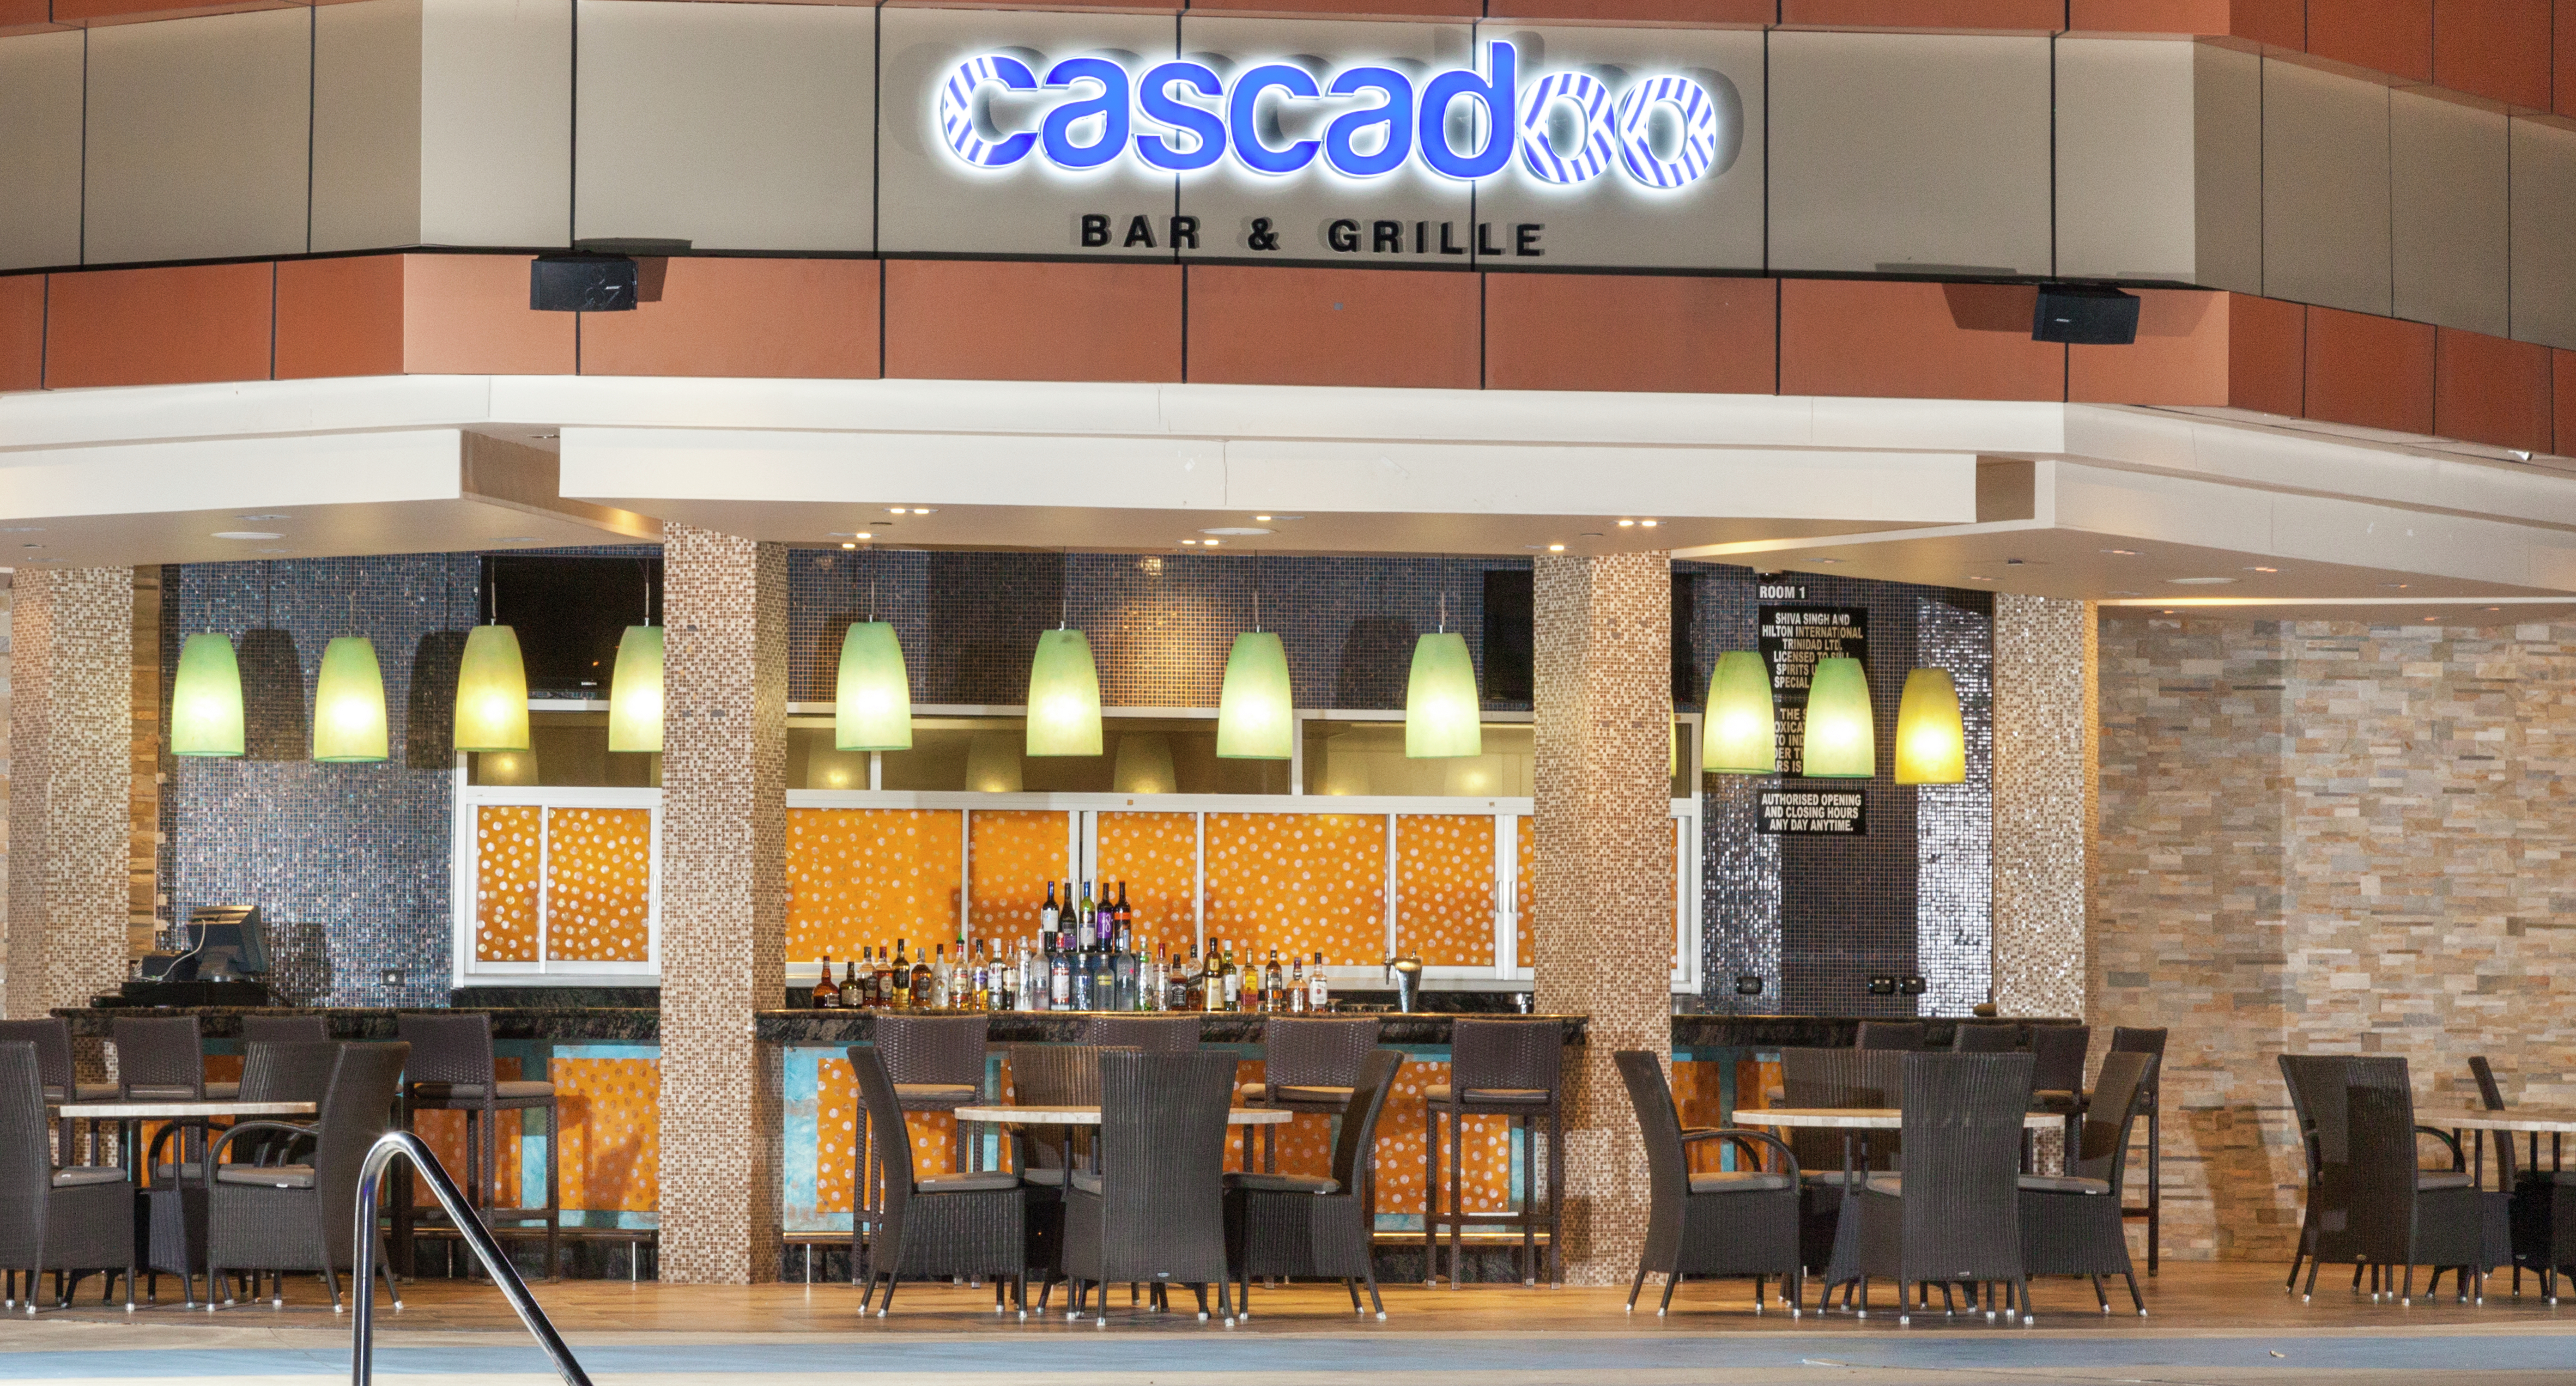 View of Cascadoo Bar & Grille with Sign